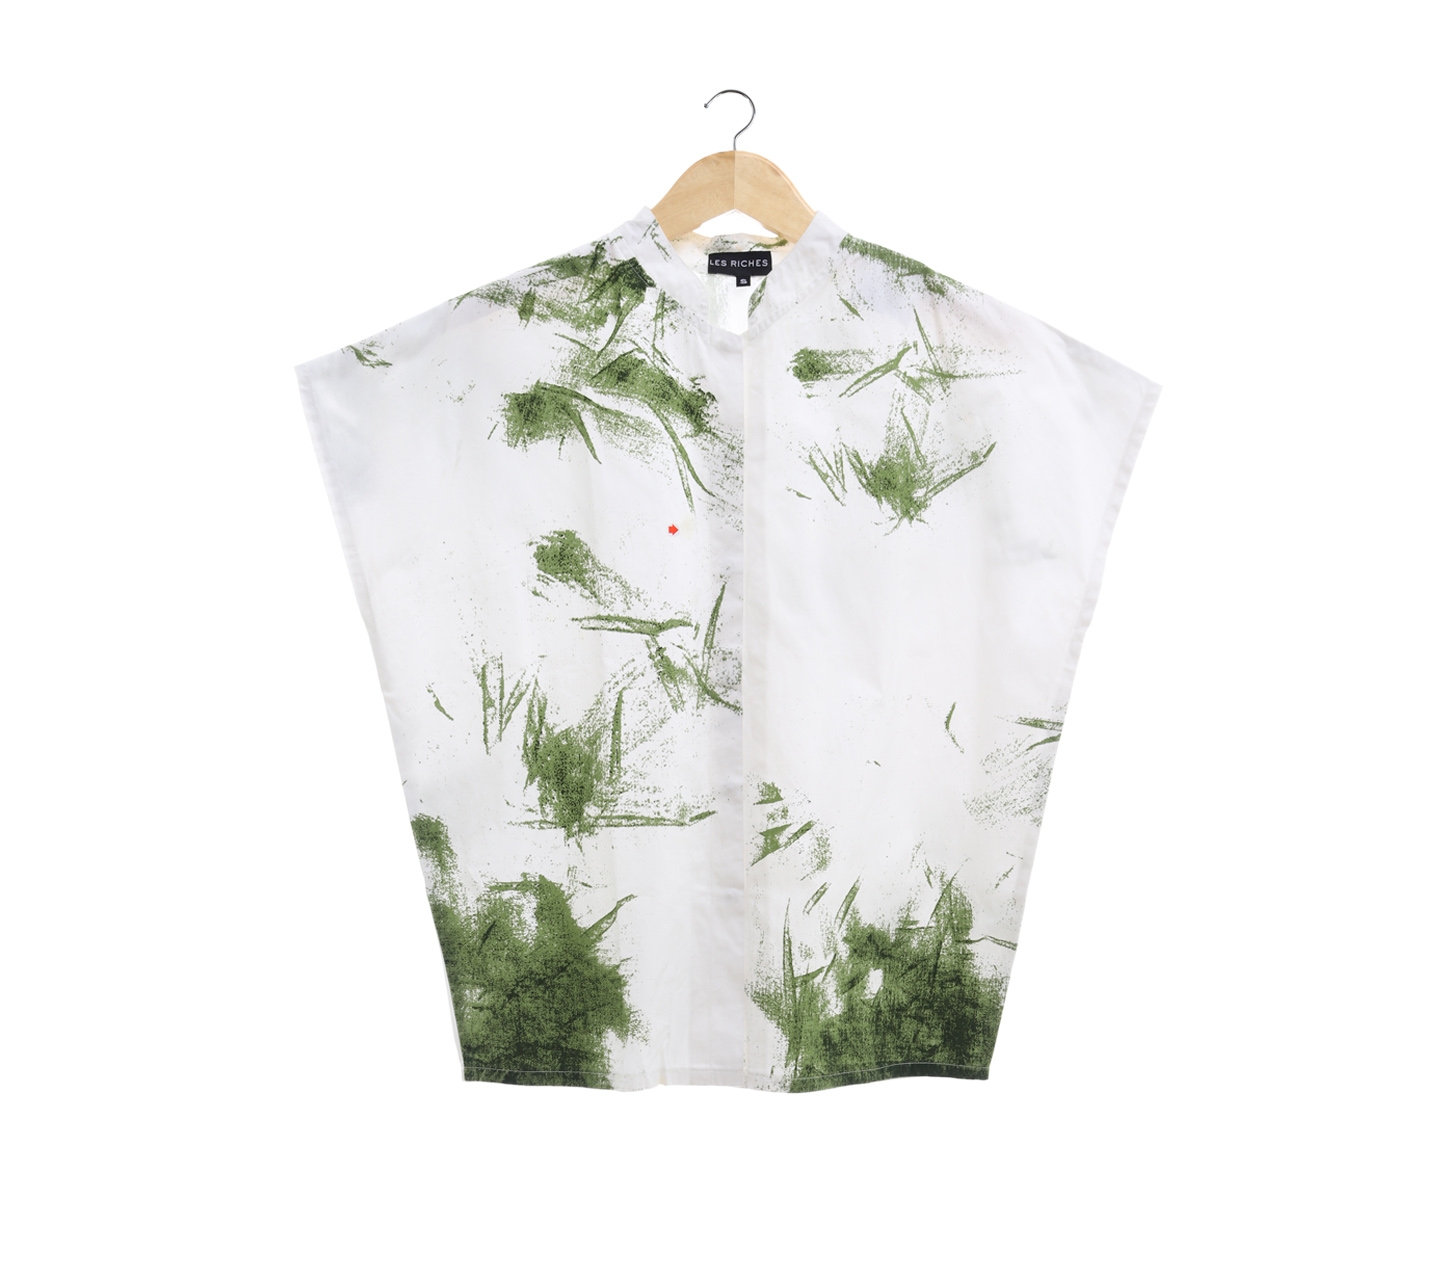 Les riches off white green pattern blouse